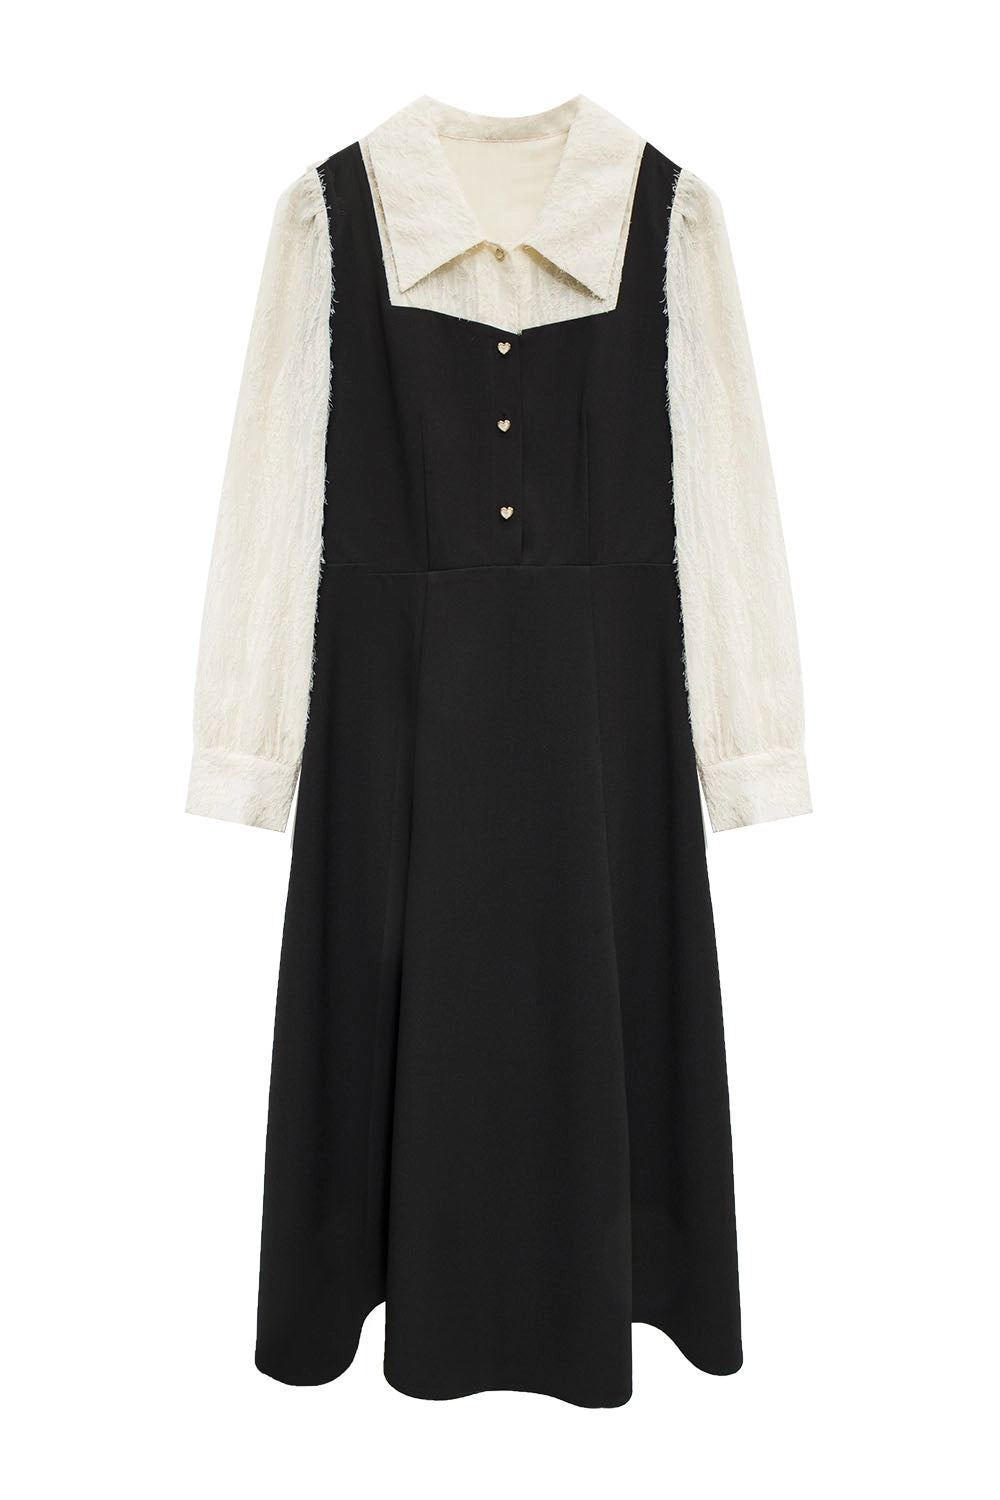 Ladies' Button-Up Dress with Contrast Collar and Puff Sleeves